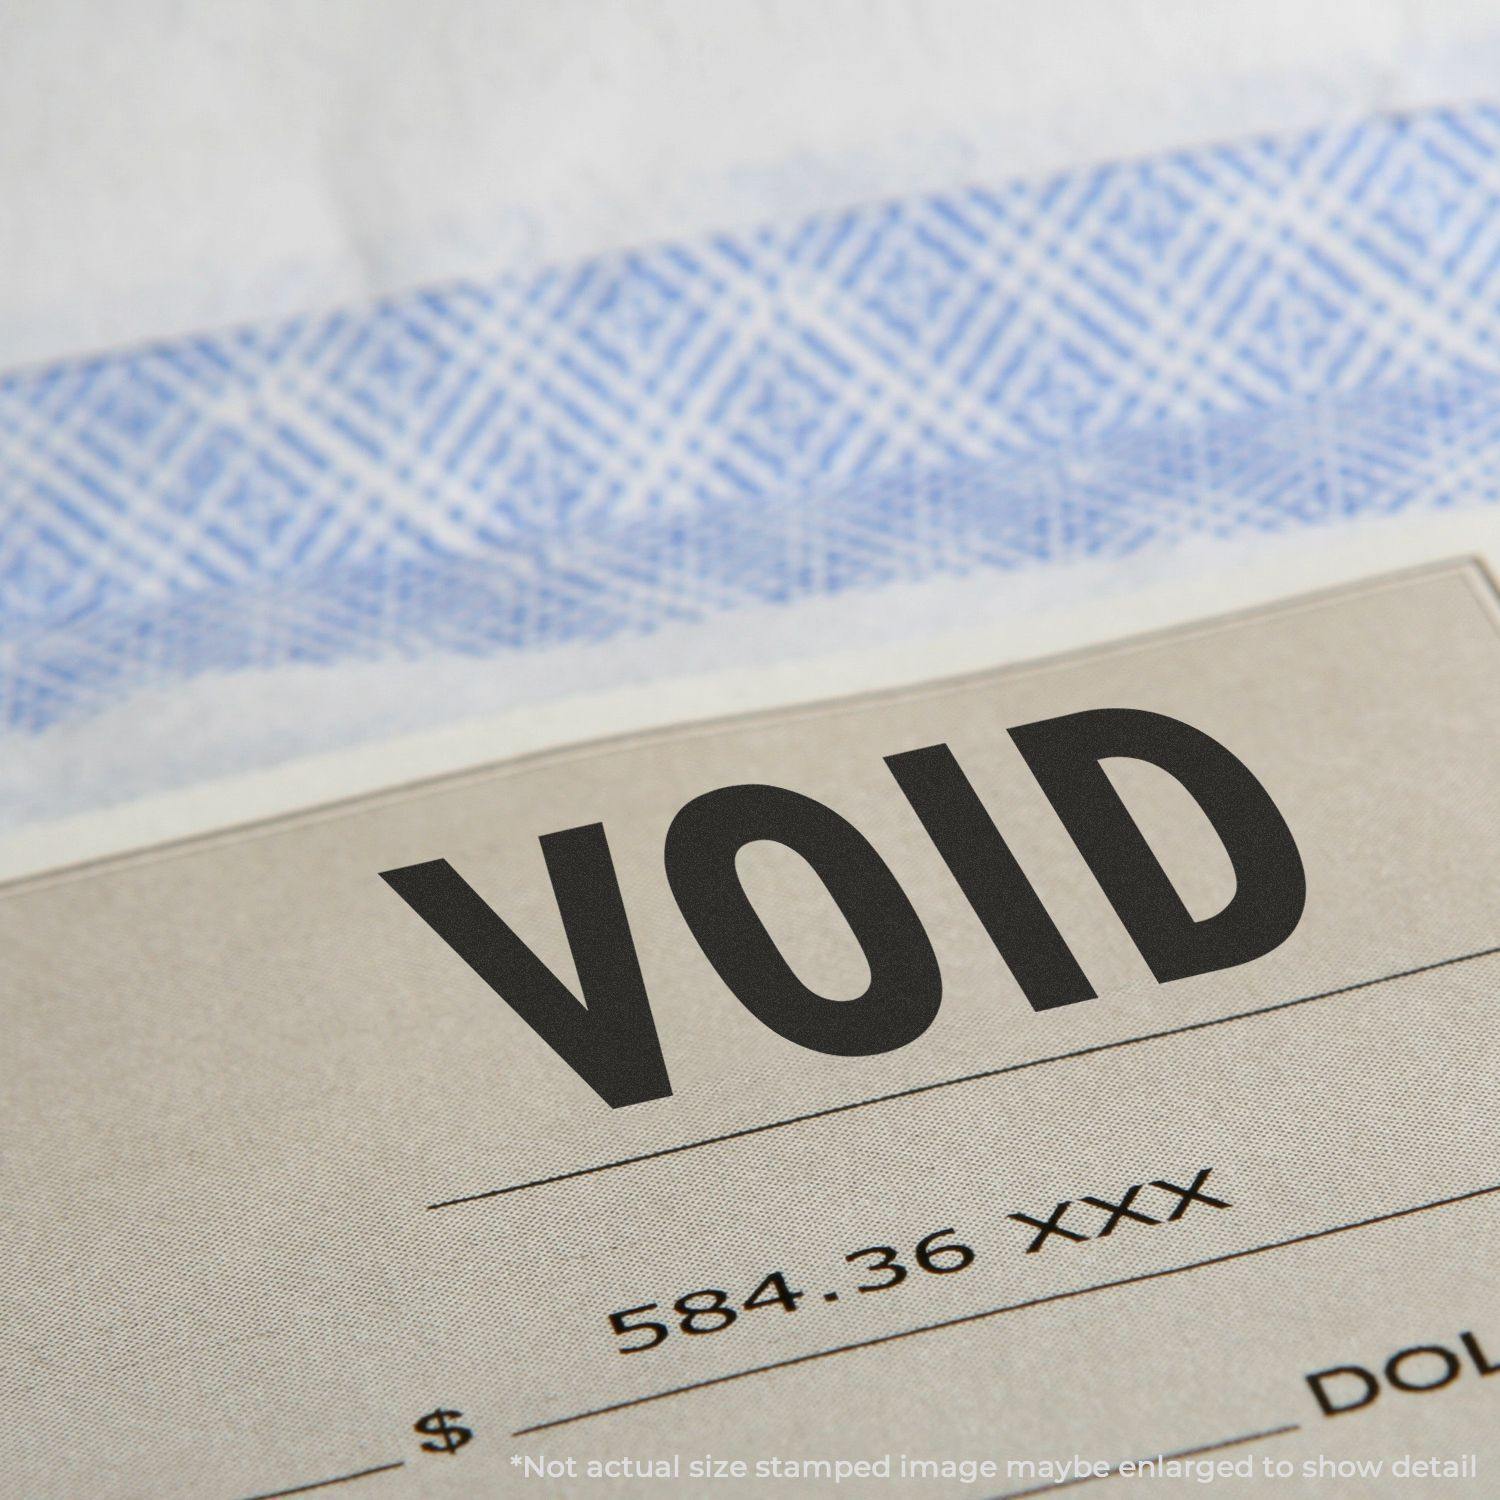 A stock office rubber stamp with a stamped image showing how the text "VOID" in a large font is displayed after stamping.